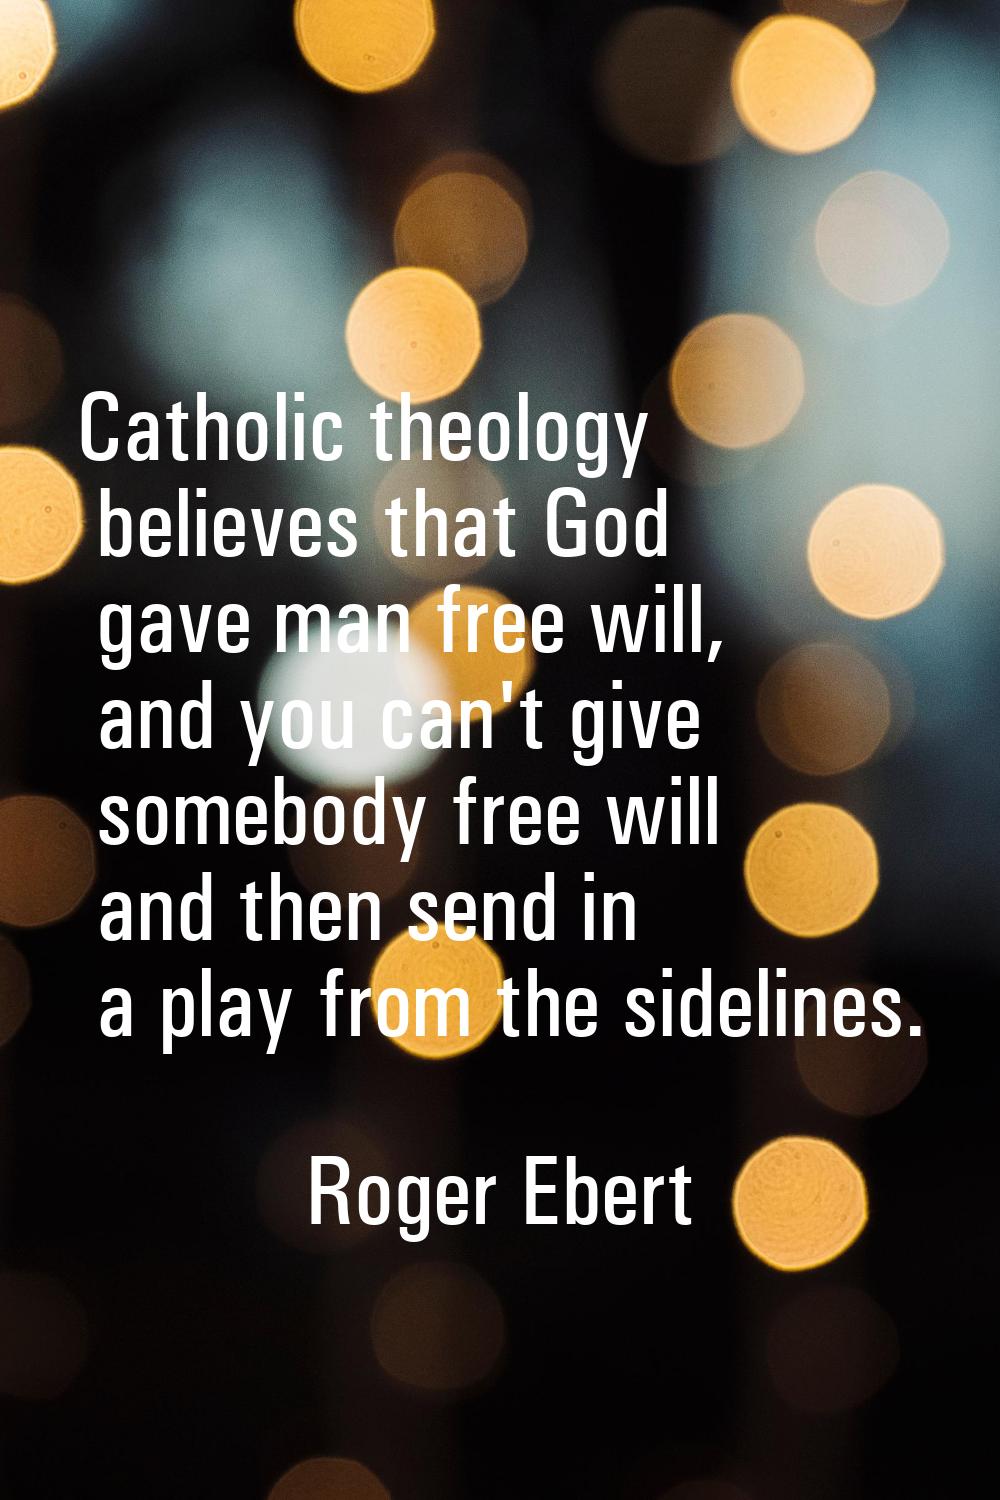 Catholic theology believes that God gave man free will, and you can't give somebody free will and t